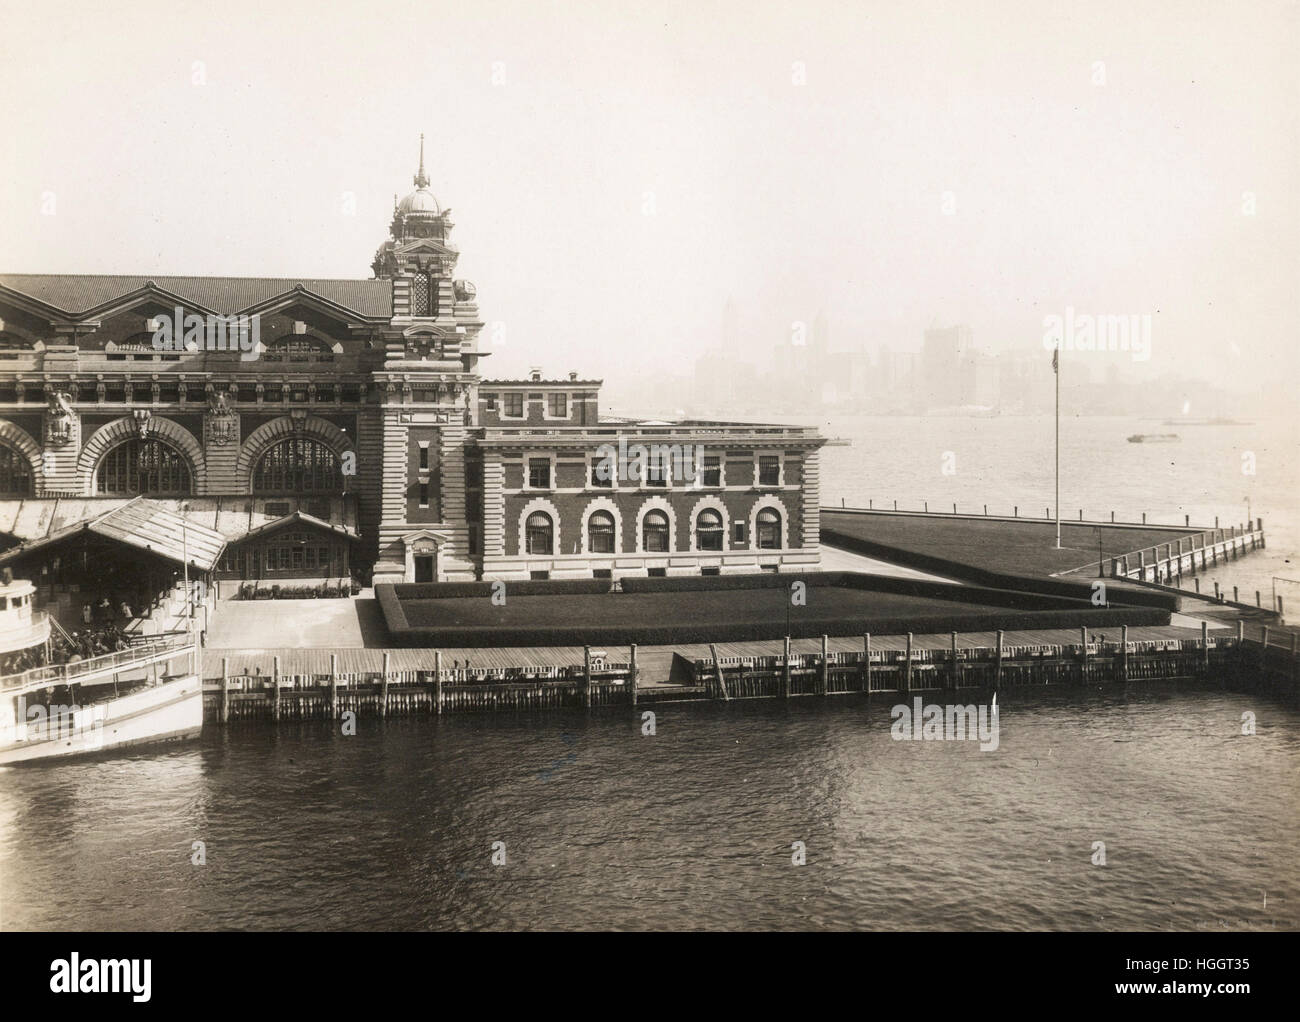 View of part of the front facade of the Immigration Station; the New York skyline is barely discernable through the haze in the background   - Ellis Island Immigration Station 1902-1913 Stock Photo